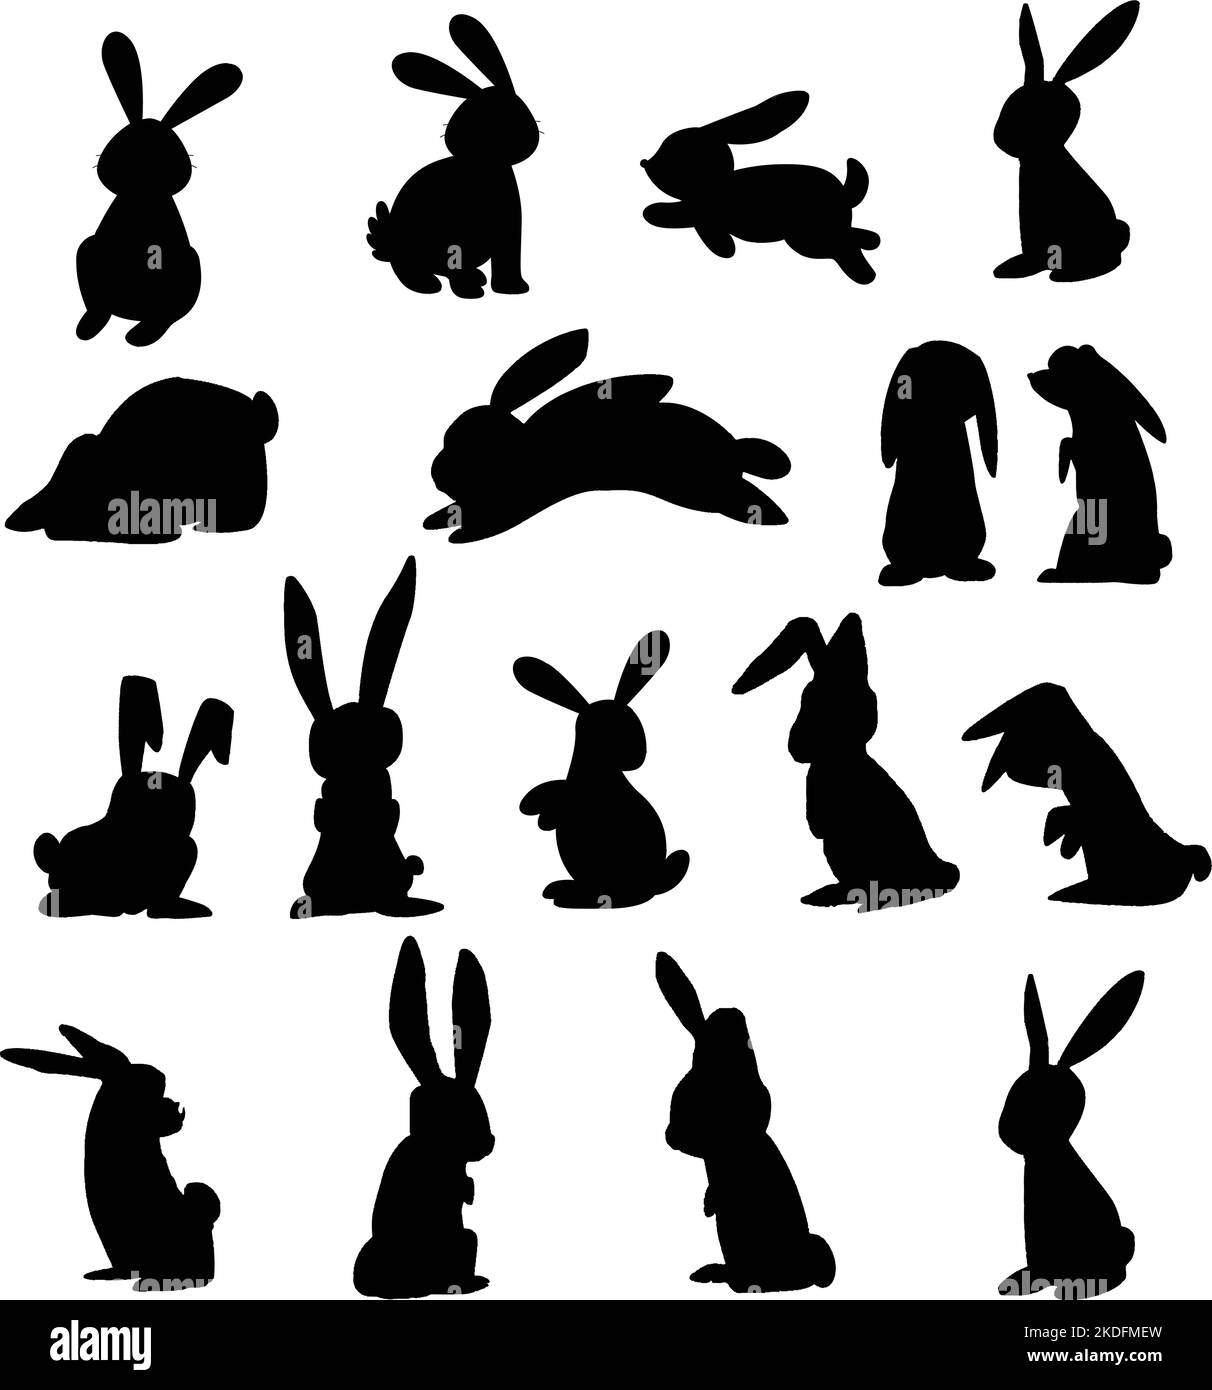 The black sticker pack of rabbits silhouettes on a white background Stock Vector